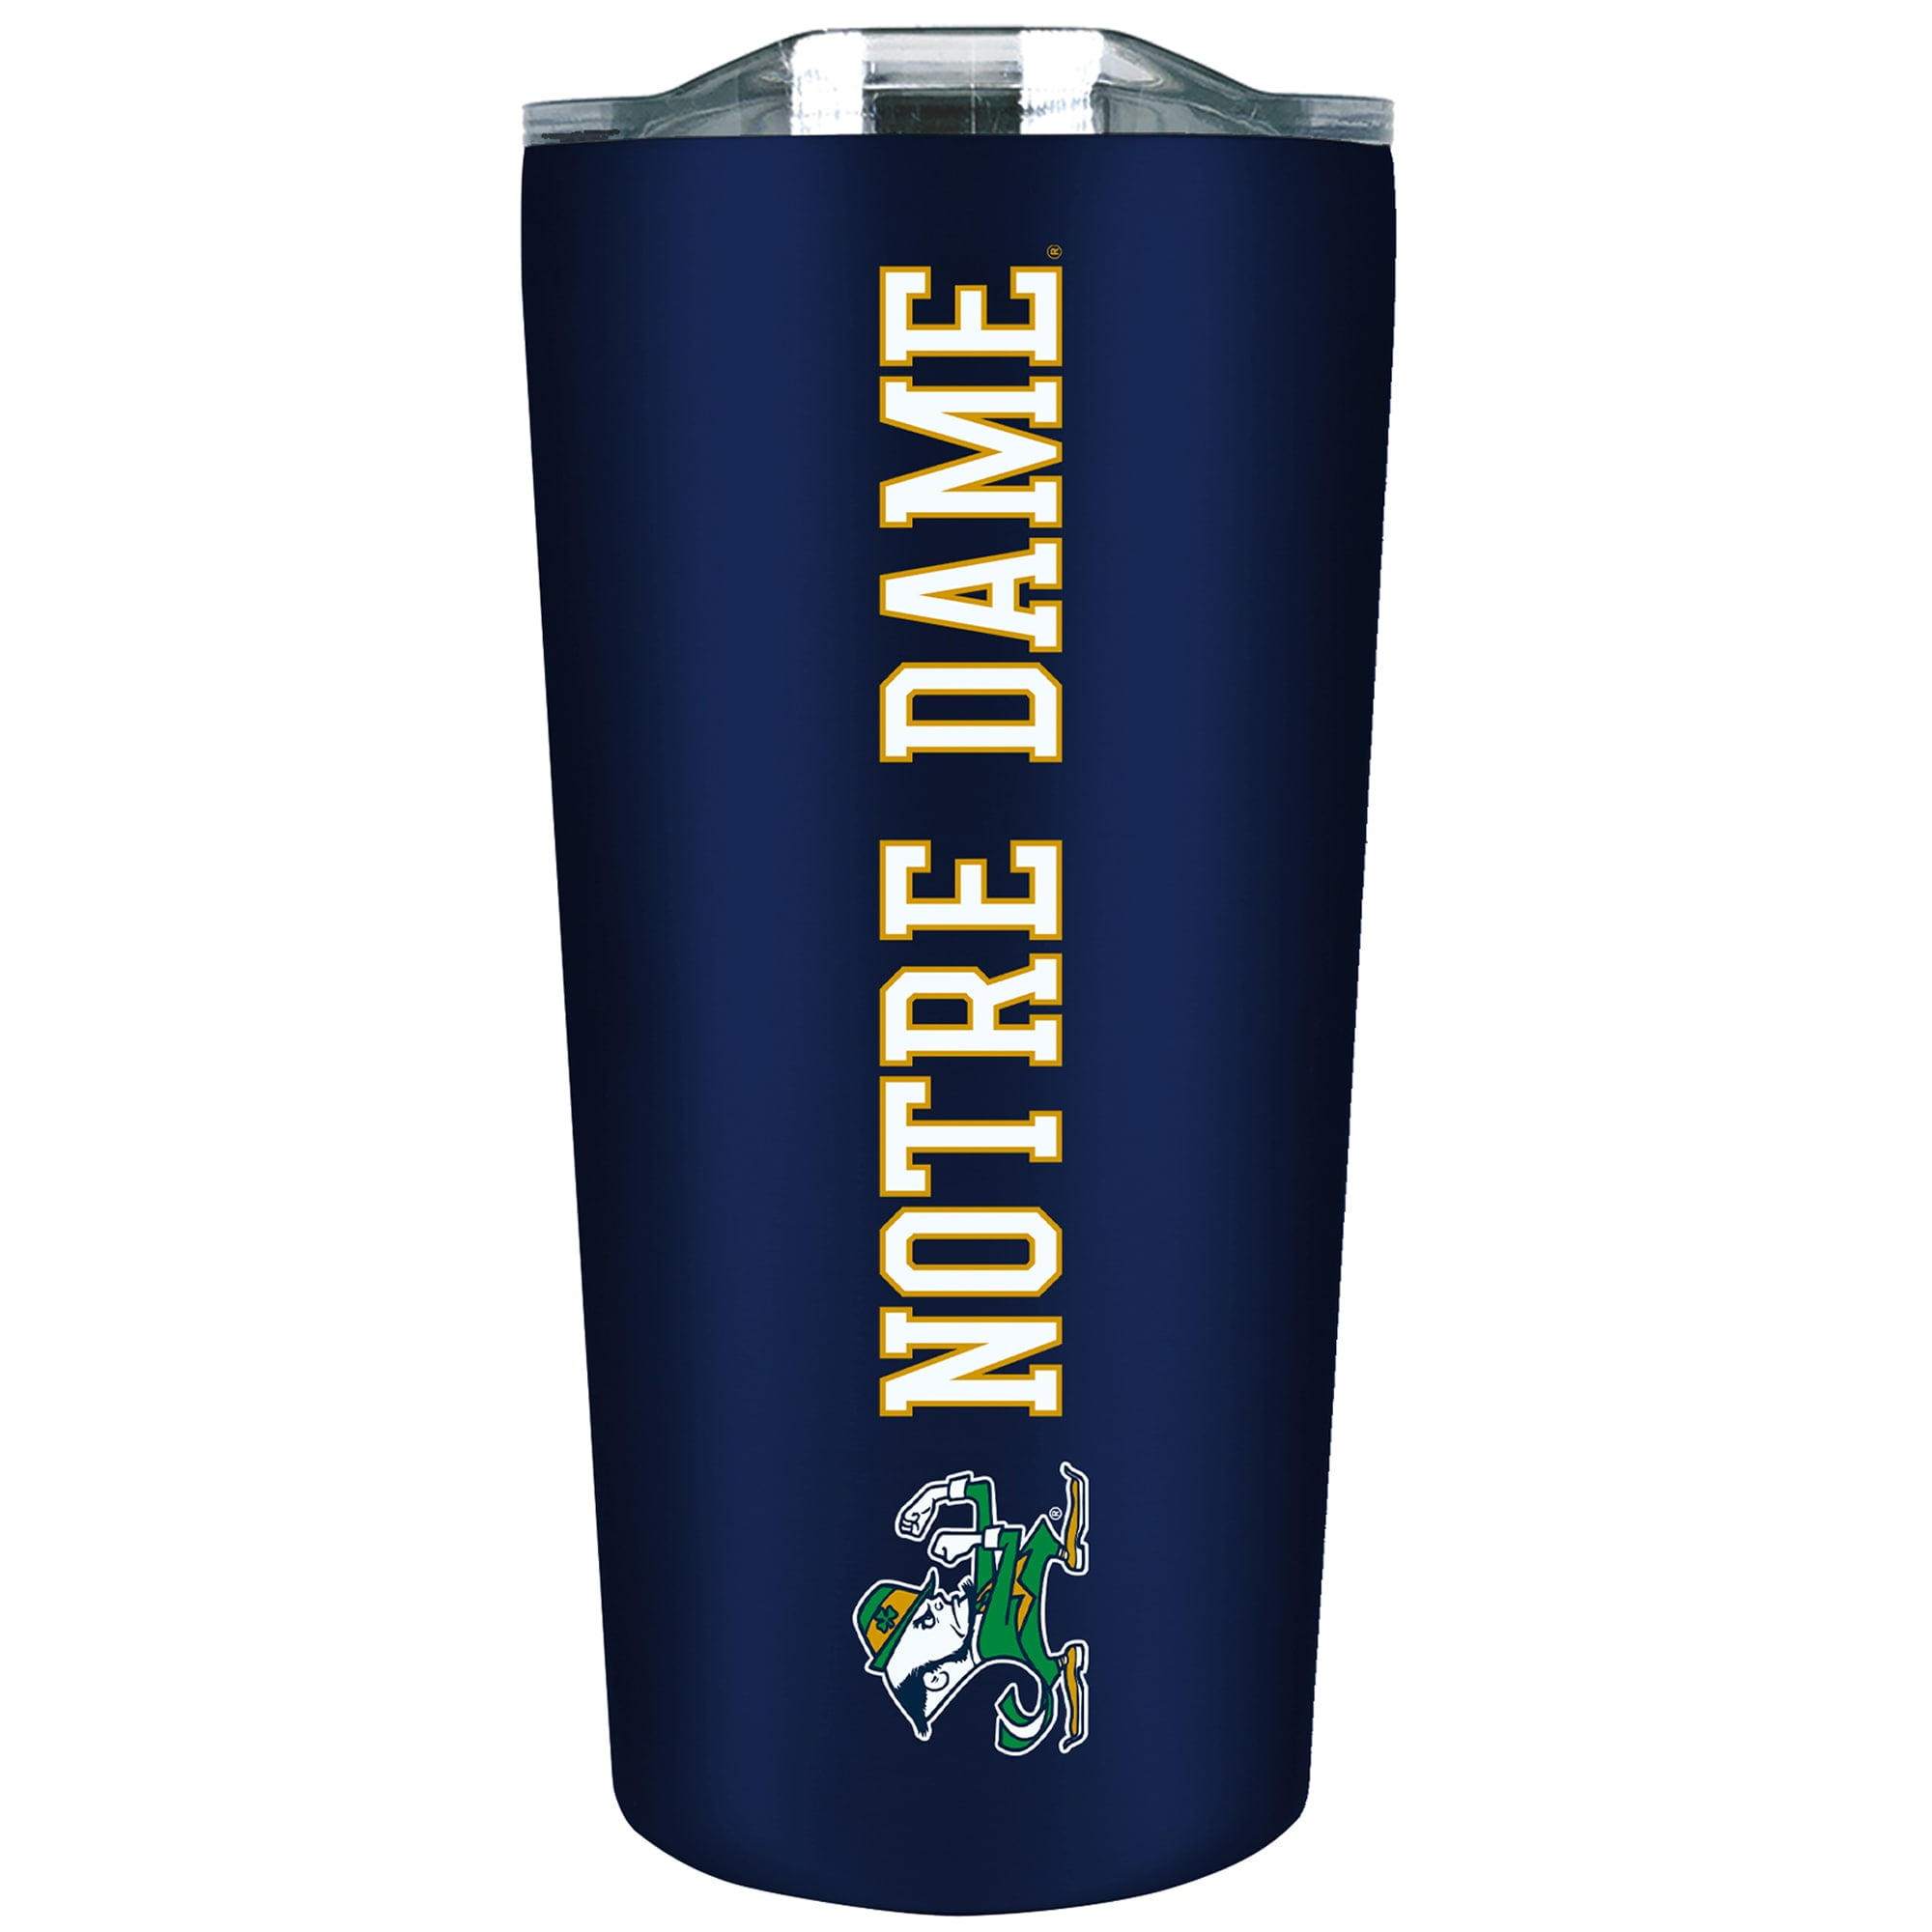 Notre Dame Fighting Irish 18oz. Stainless Soft Touch Tumbler 